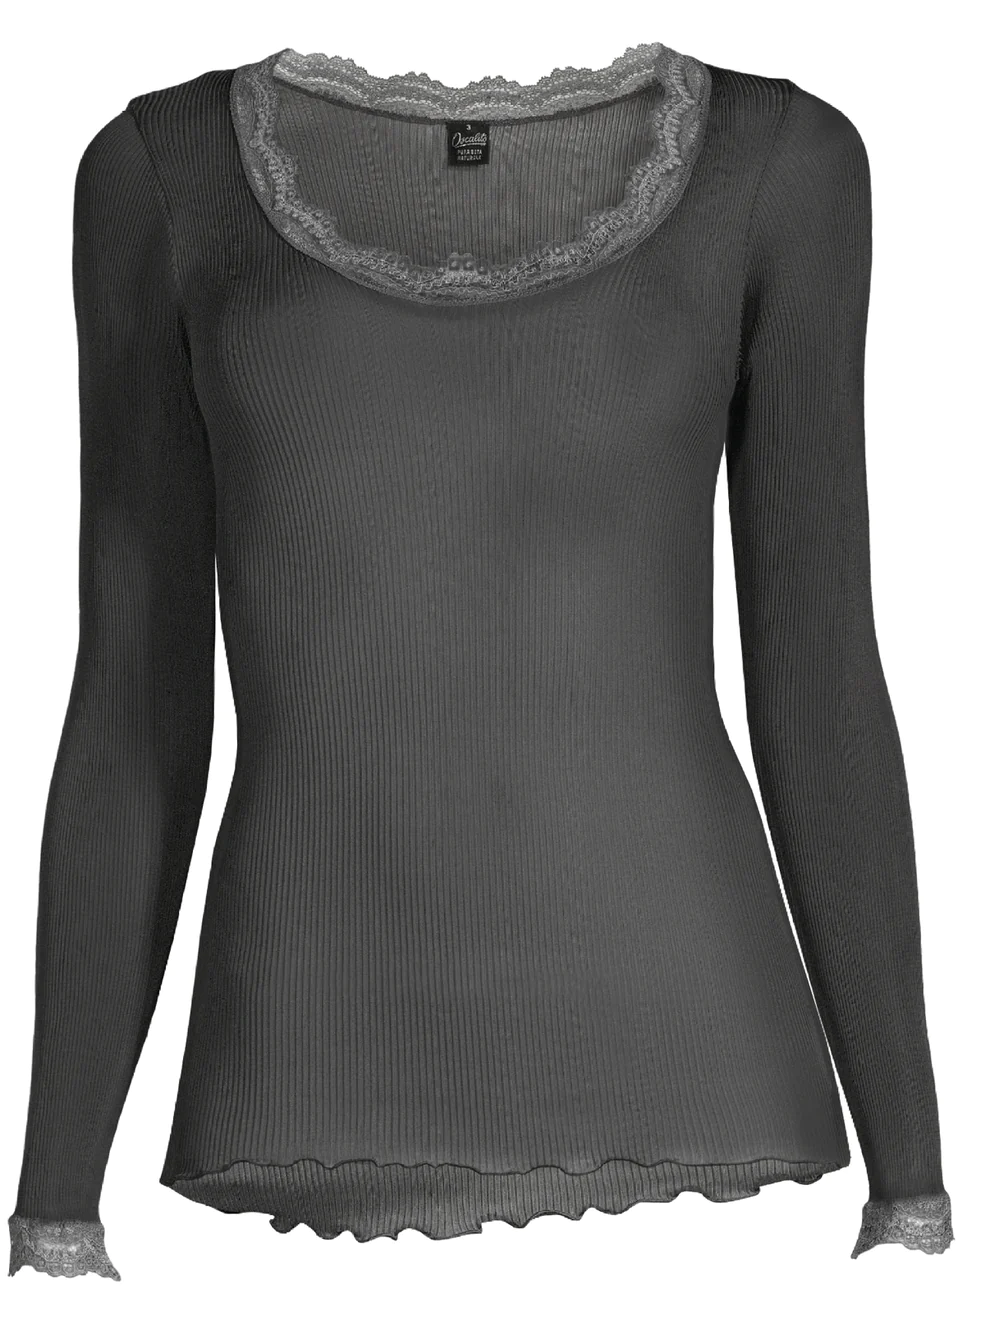 Smoke. Long Sleeve style delicate fine ribbed knit fabric in pure silk organza with the most elegant and feminine French leavers lace at the neckline and cuff. The lace is certified and numbered as true “Dentelle de Calais®”. Super-soft touch with no side seams, the construction is for the ultimate in comfort. Featuring a gently scooped neckline this top allows for a multiple of uses, as underwear or outerwear.  100% Silk All Oscalito Silk is certified GOTs. Machine washable  (In stock, 3 day delivery)